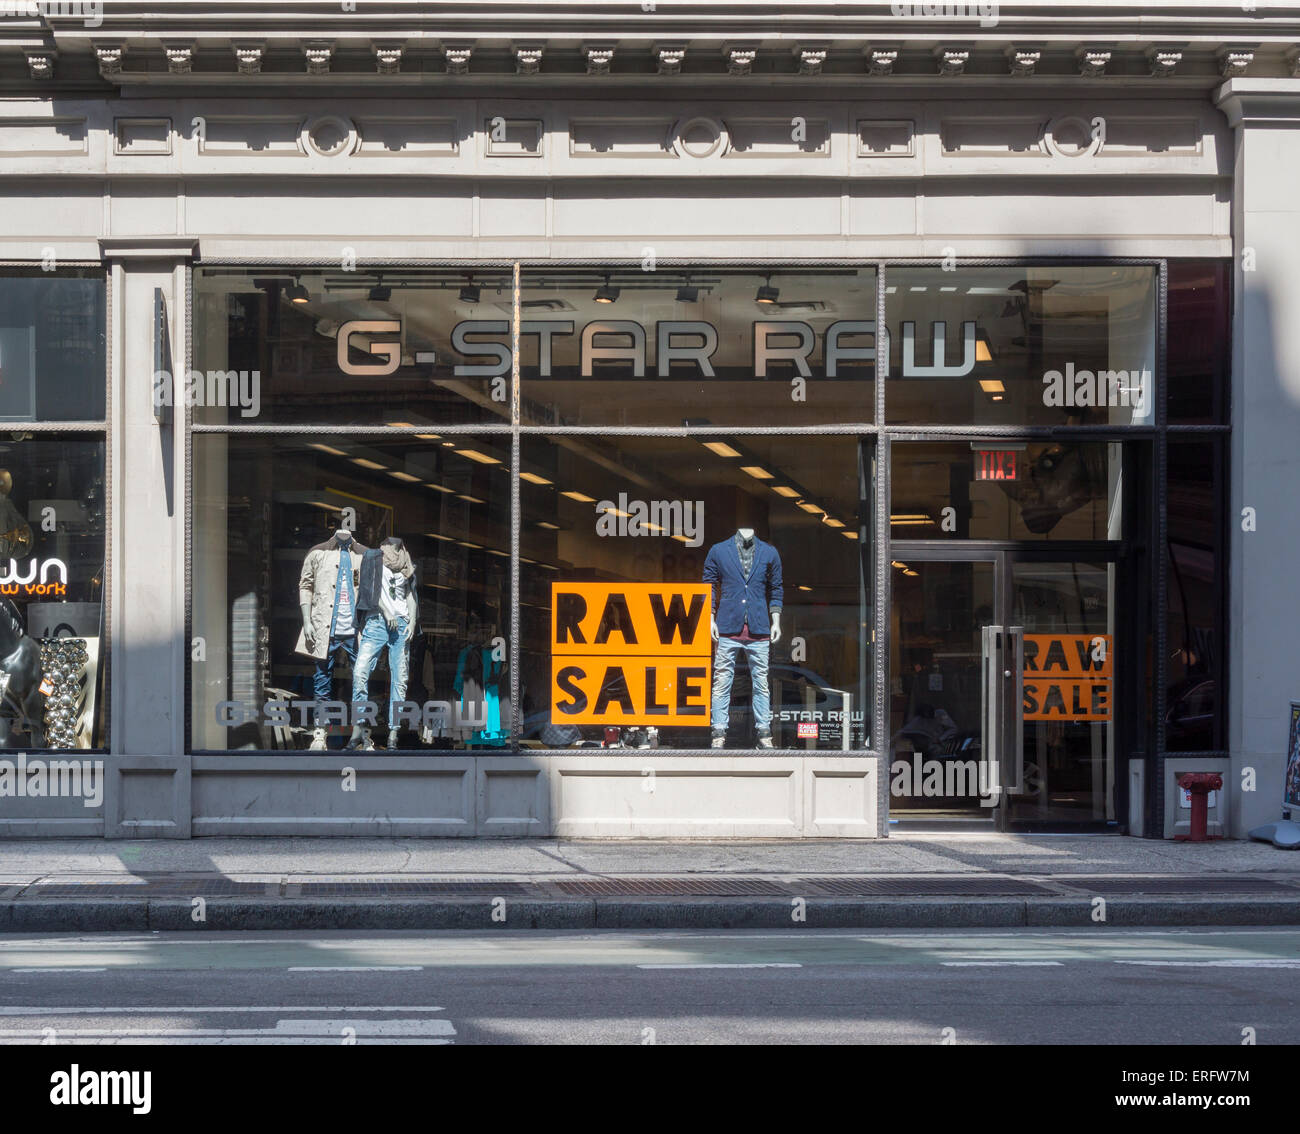 A retail store of the Dutch designer clothing company G-Star RAW in New York on Saturday, May 30, 2015. (© Richard B. Levine) Stock Photo